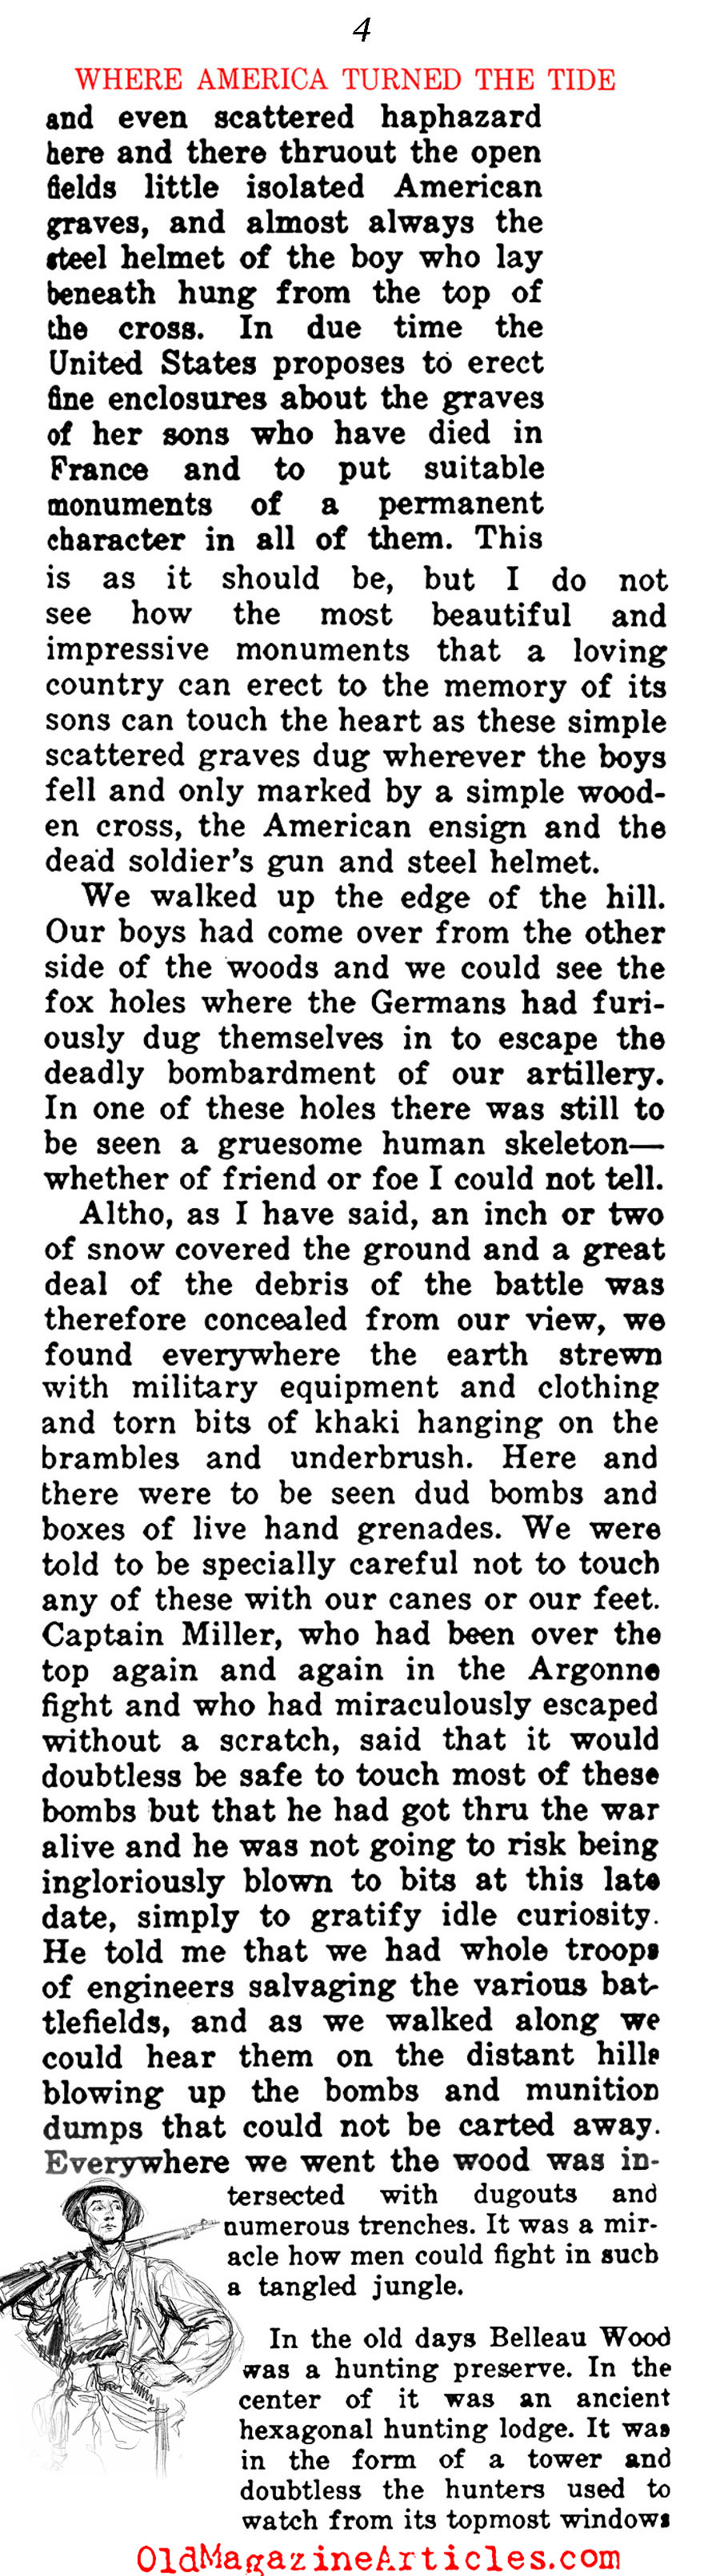 A Walk Through Five W.W. I American Battlefields  (The Independent, 1919)